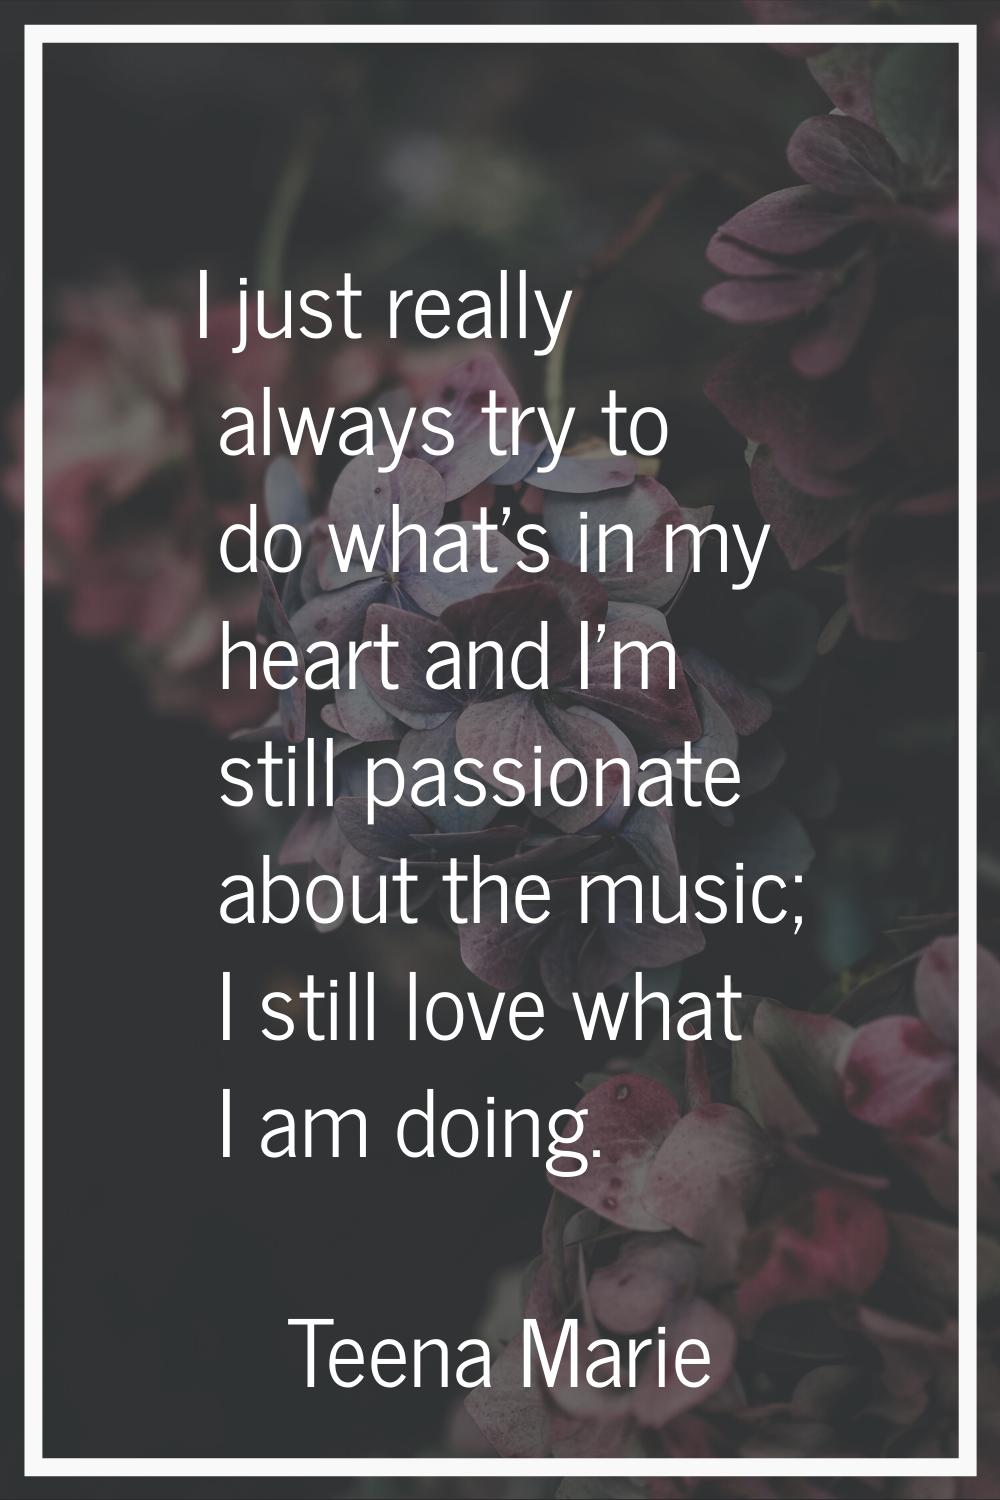 I just really always try to do what's in my heart and I'm still passionate about the music; I still